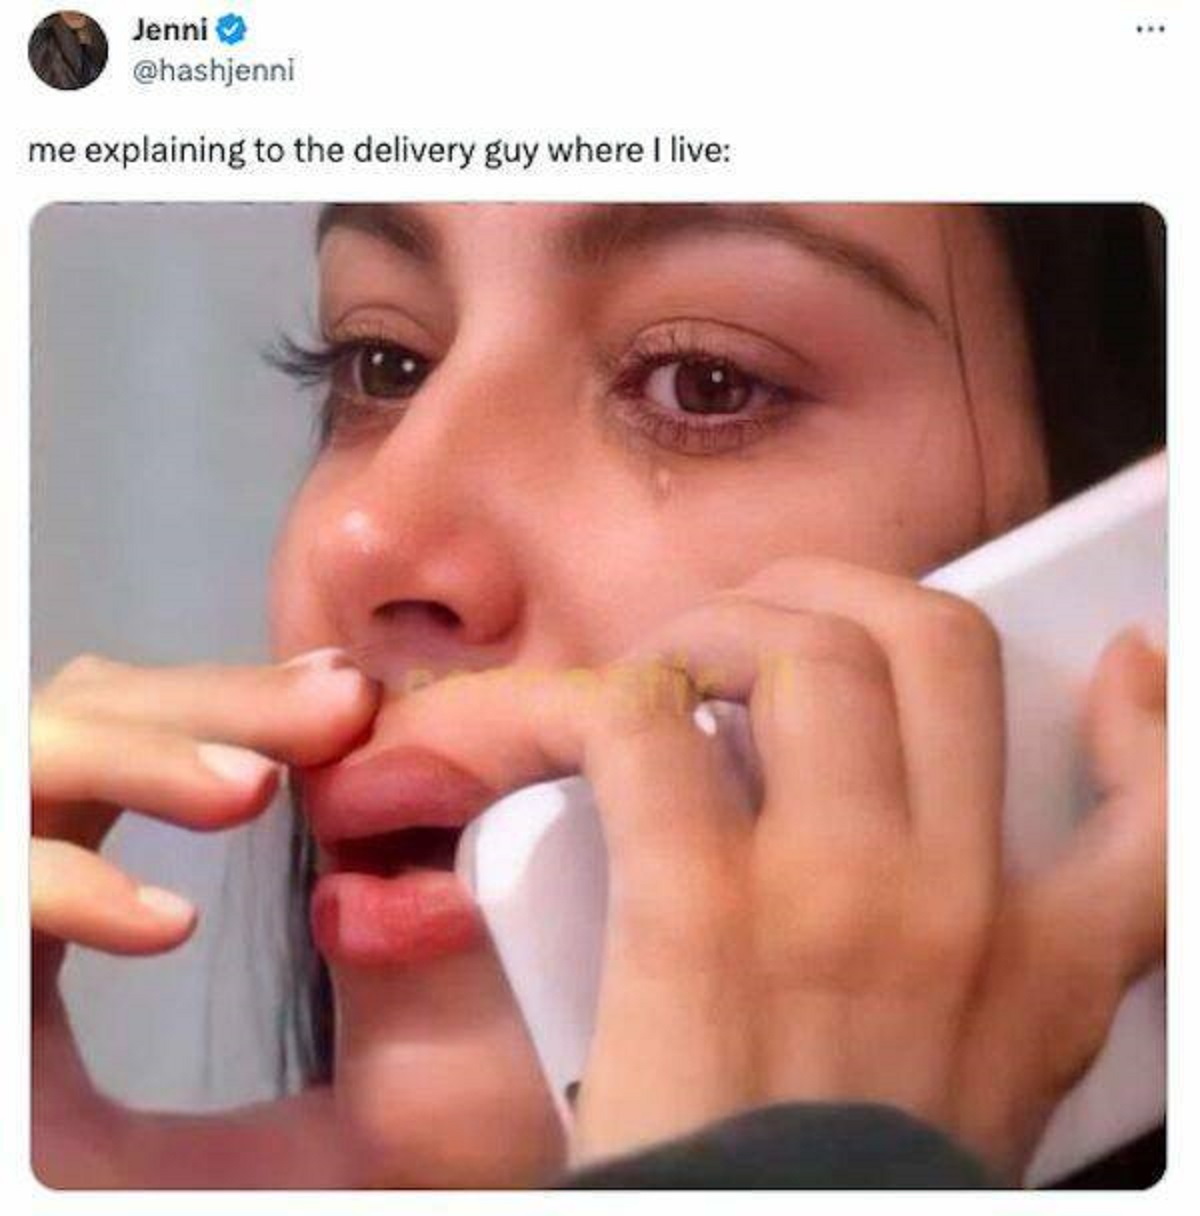 funny tweets - lip - Jenni me explaining to the delivery guy where I live